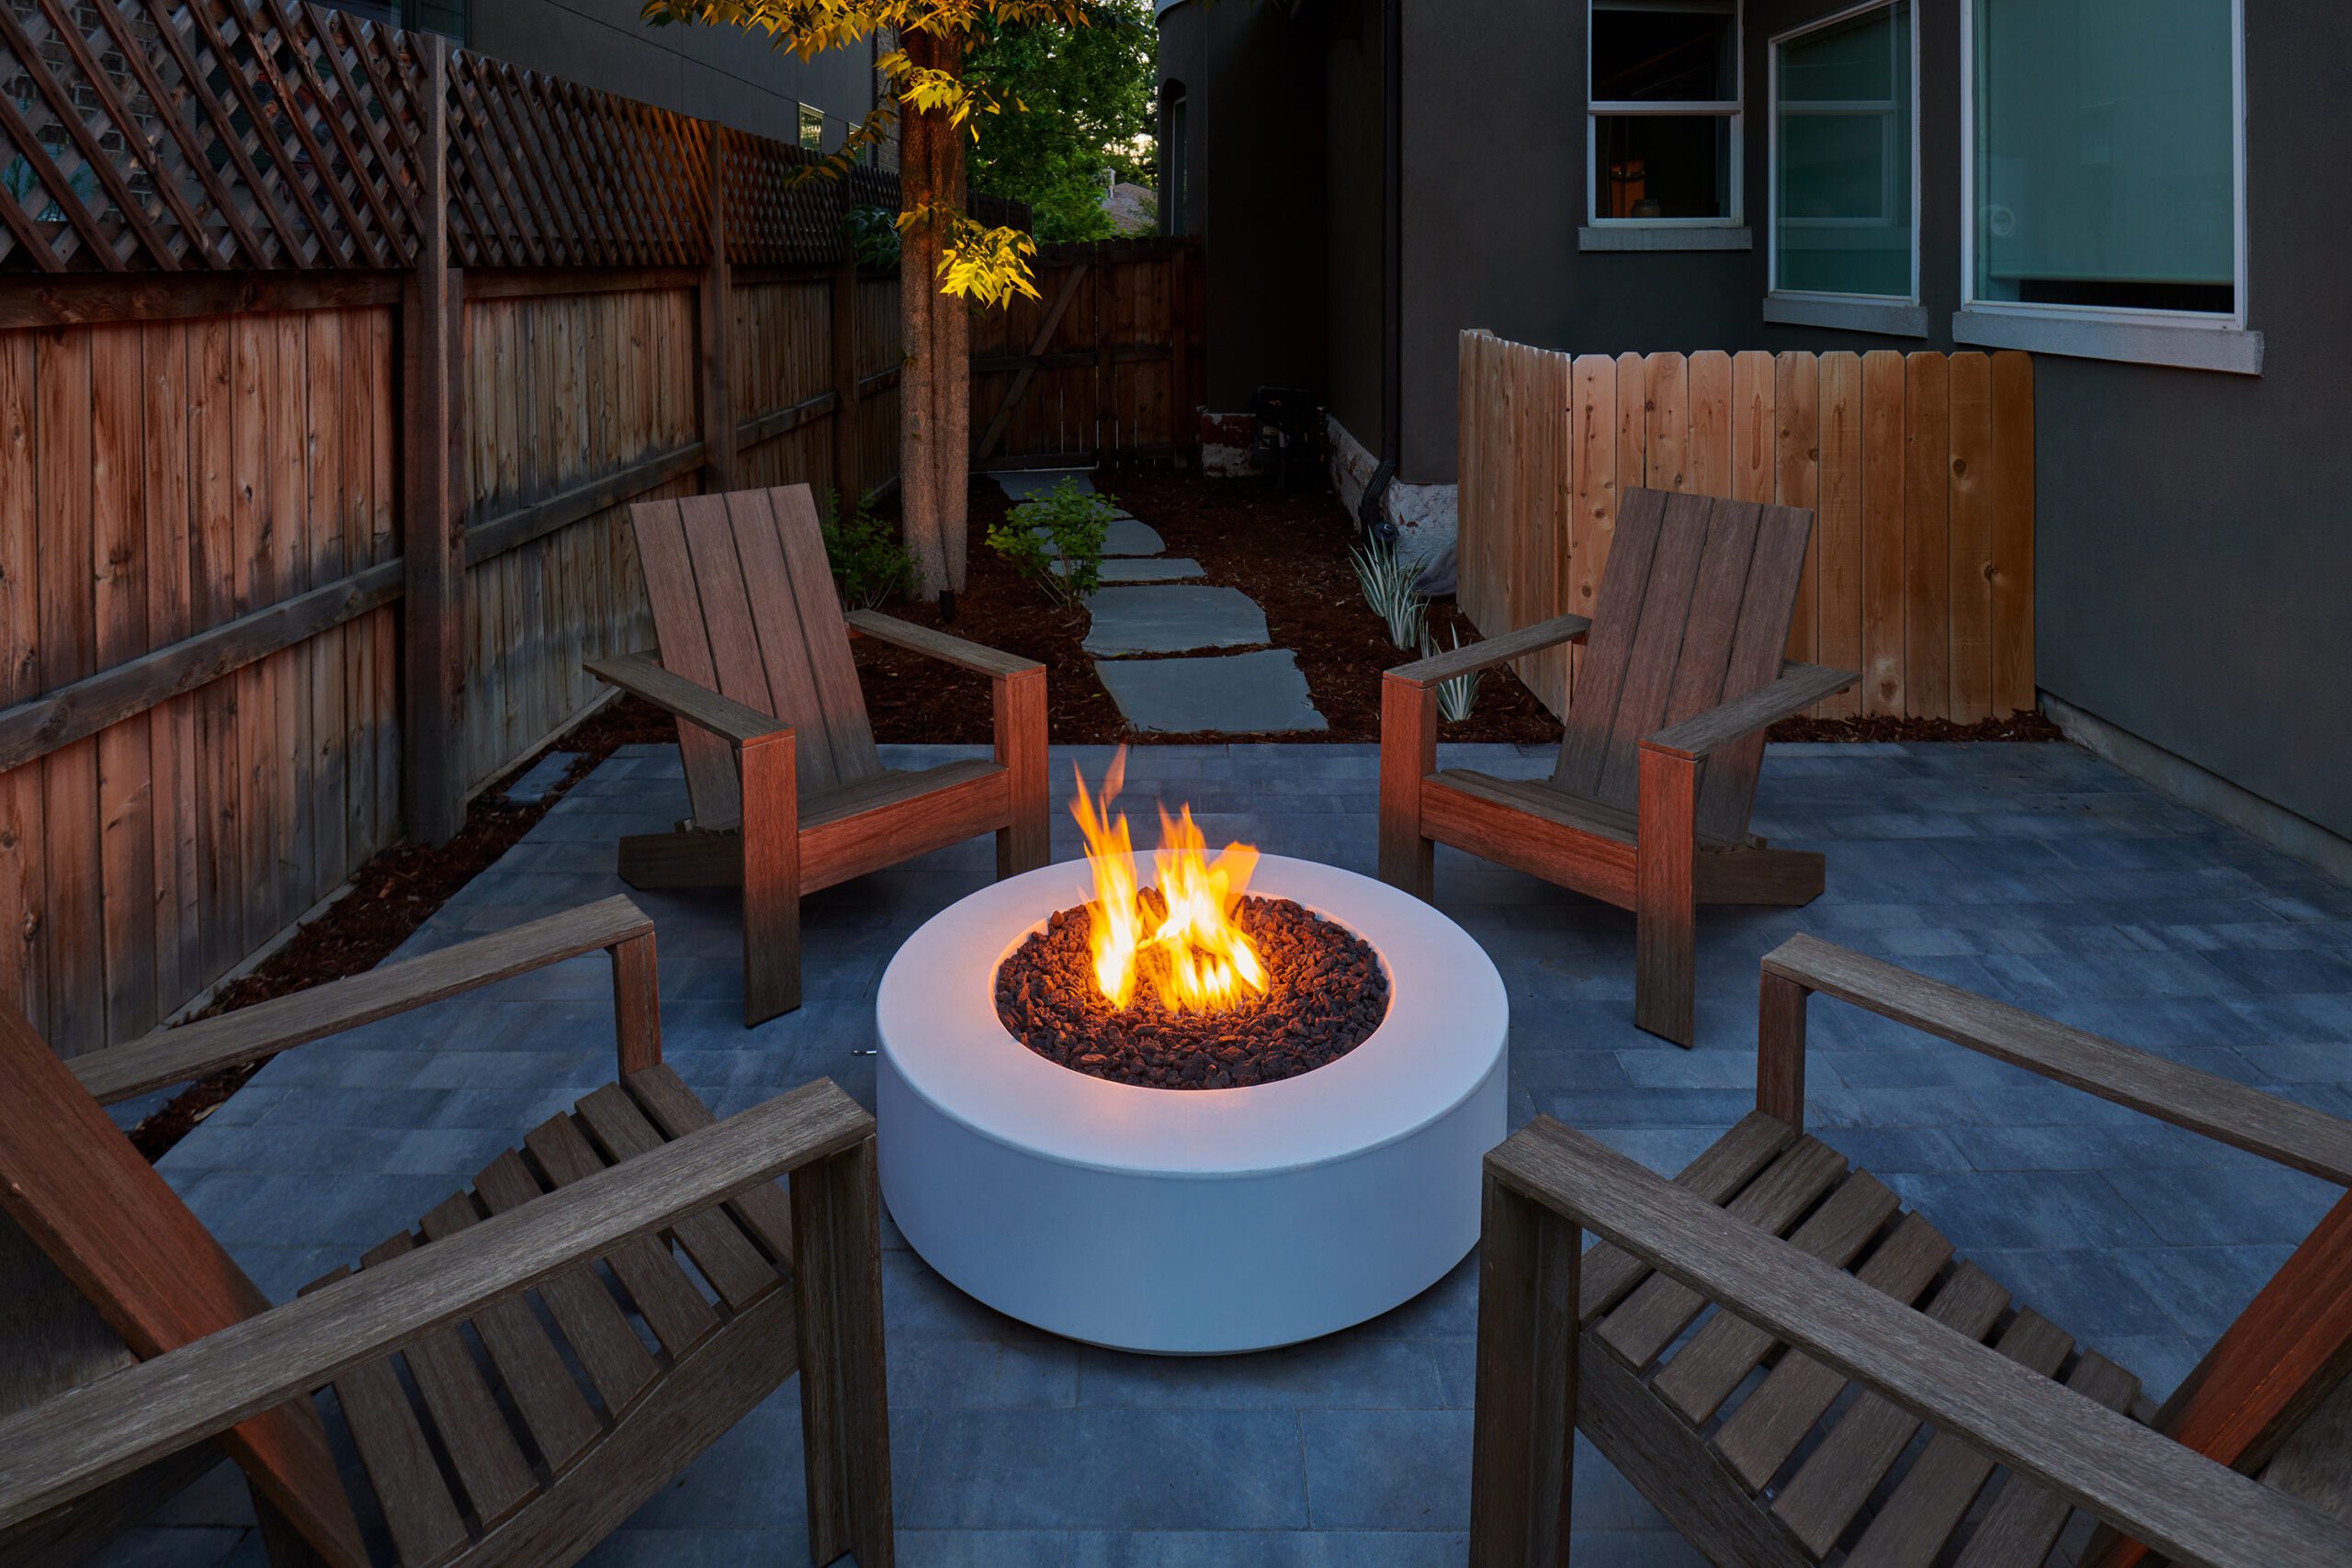 Premium Fire Pit Solutions in Centennial, Cherry Creek, & Lone Tree, CO